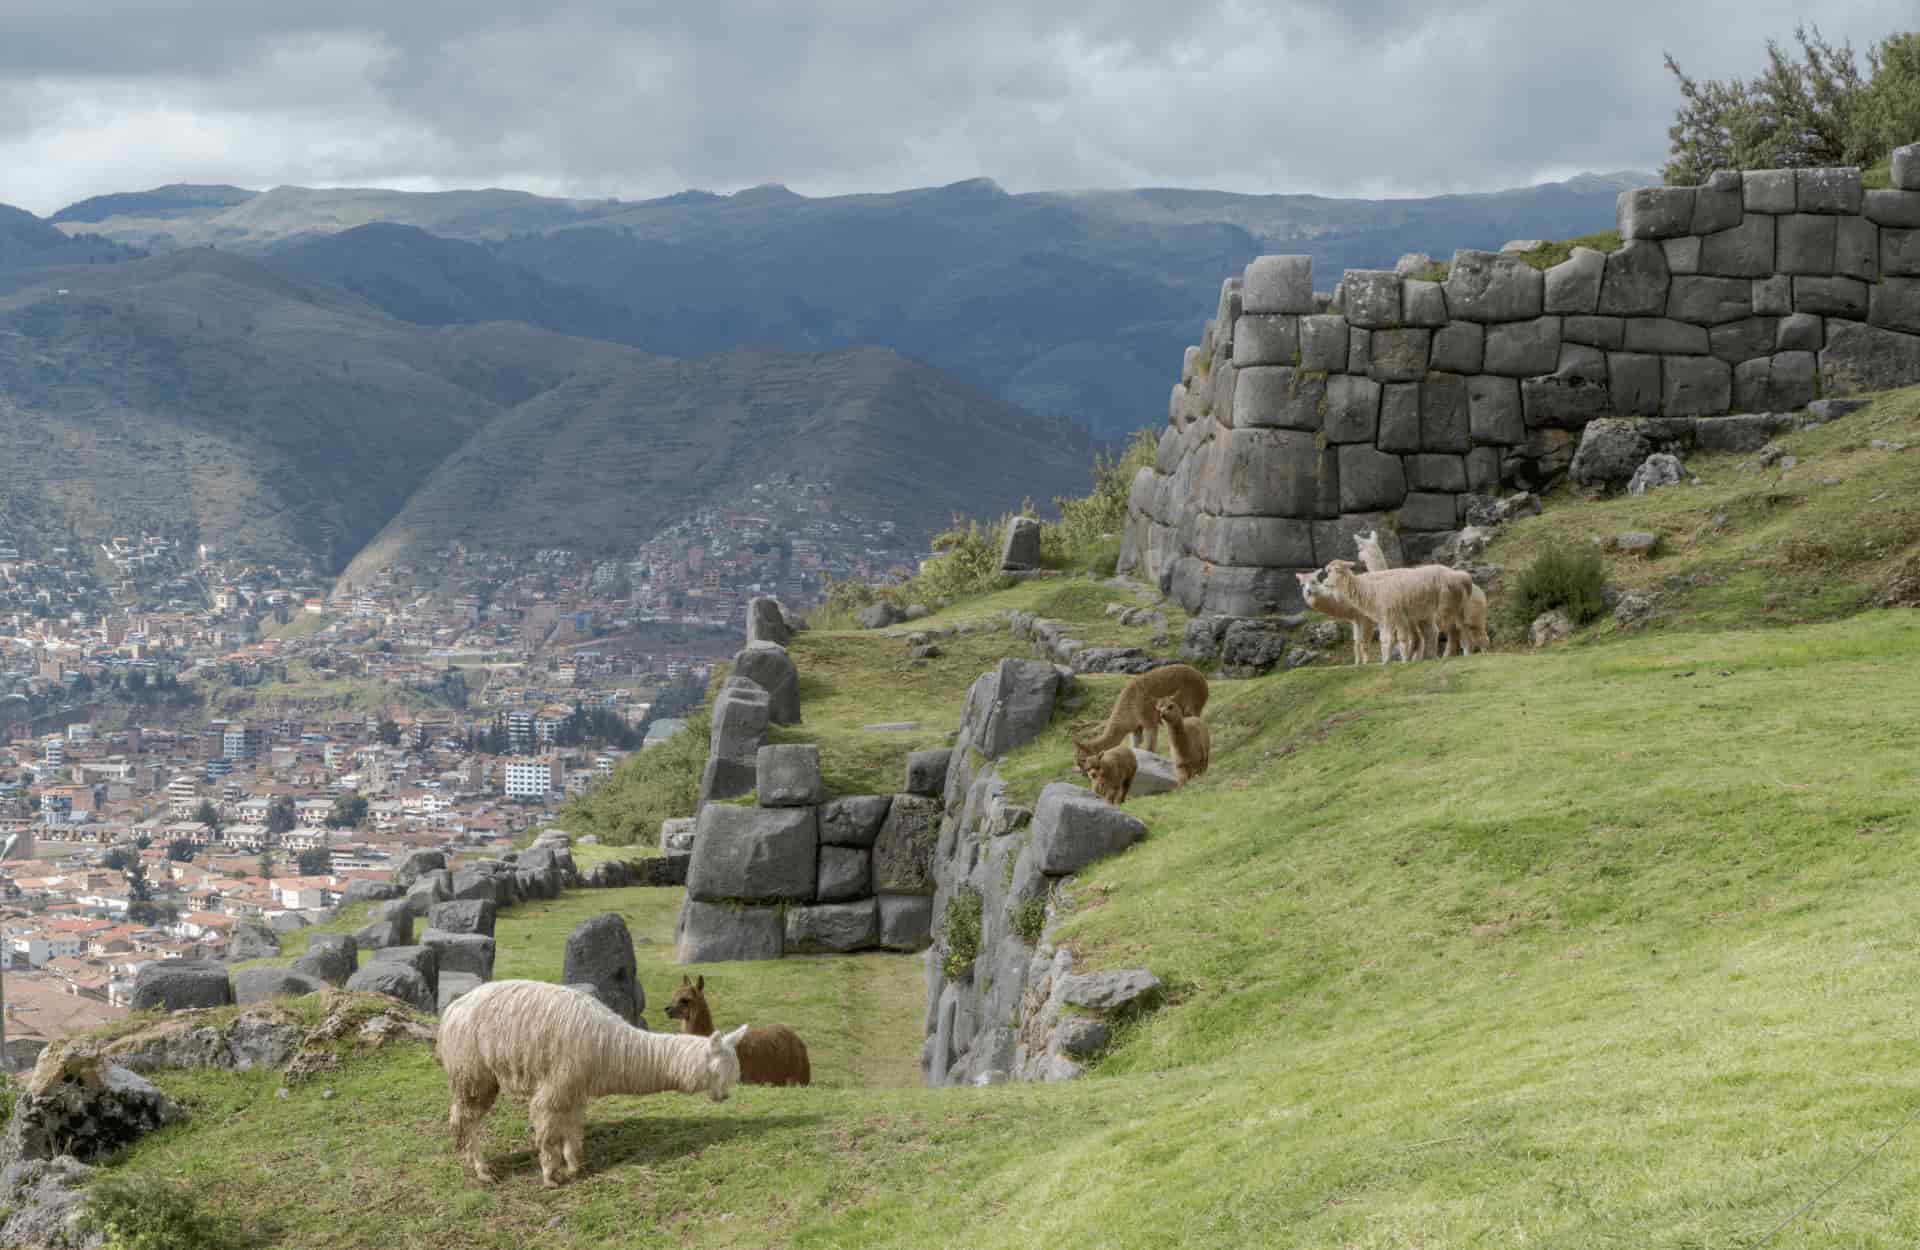 Many andean camelids spread around the Cruzmoqo viewpoint.